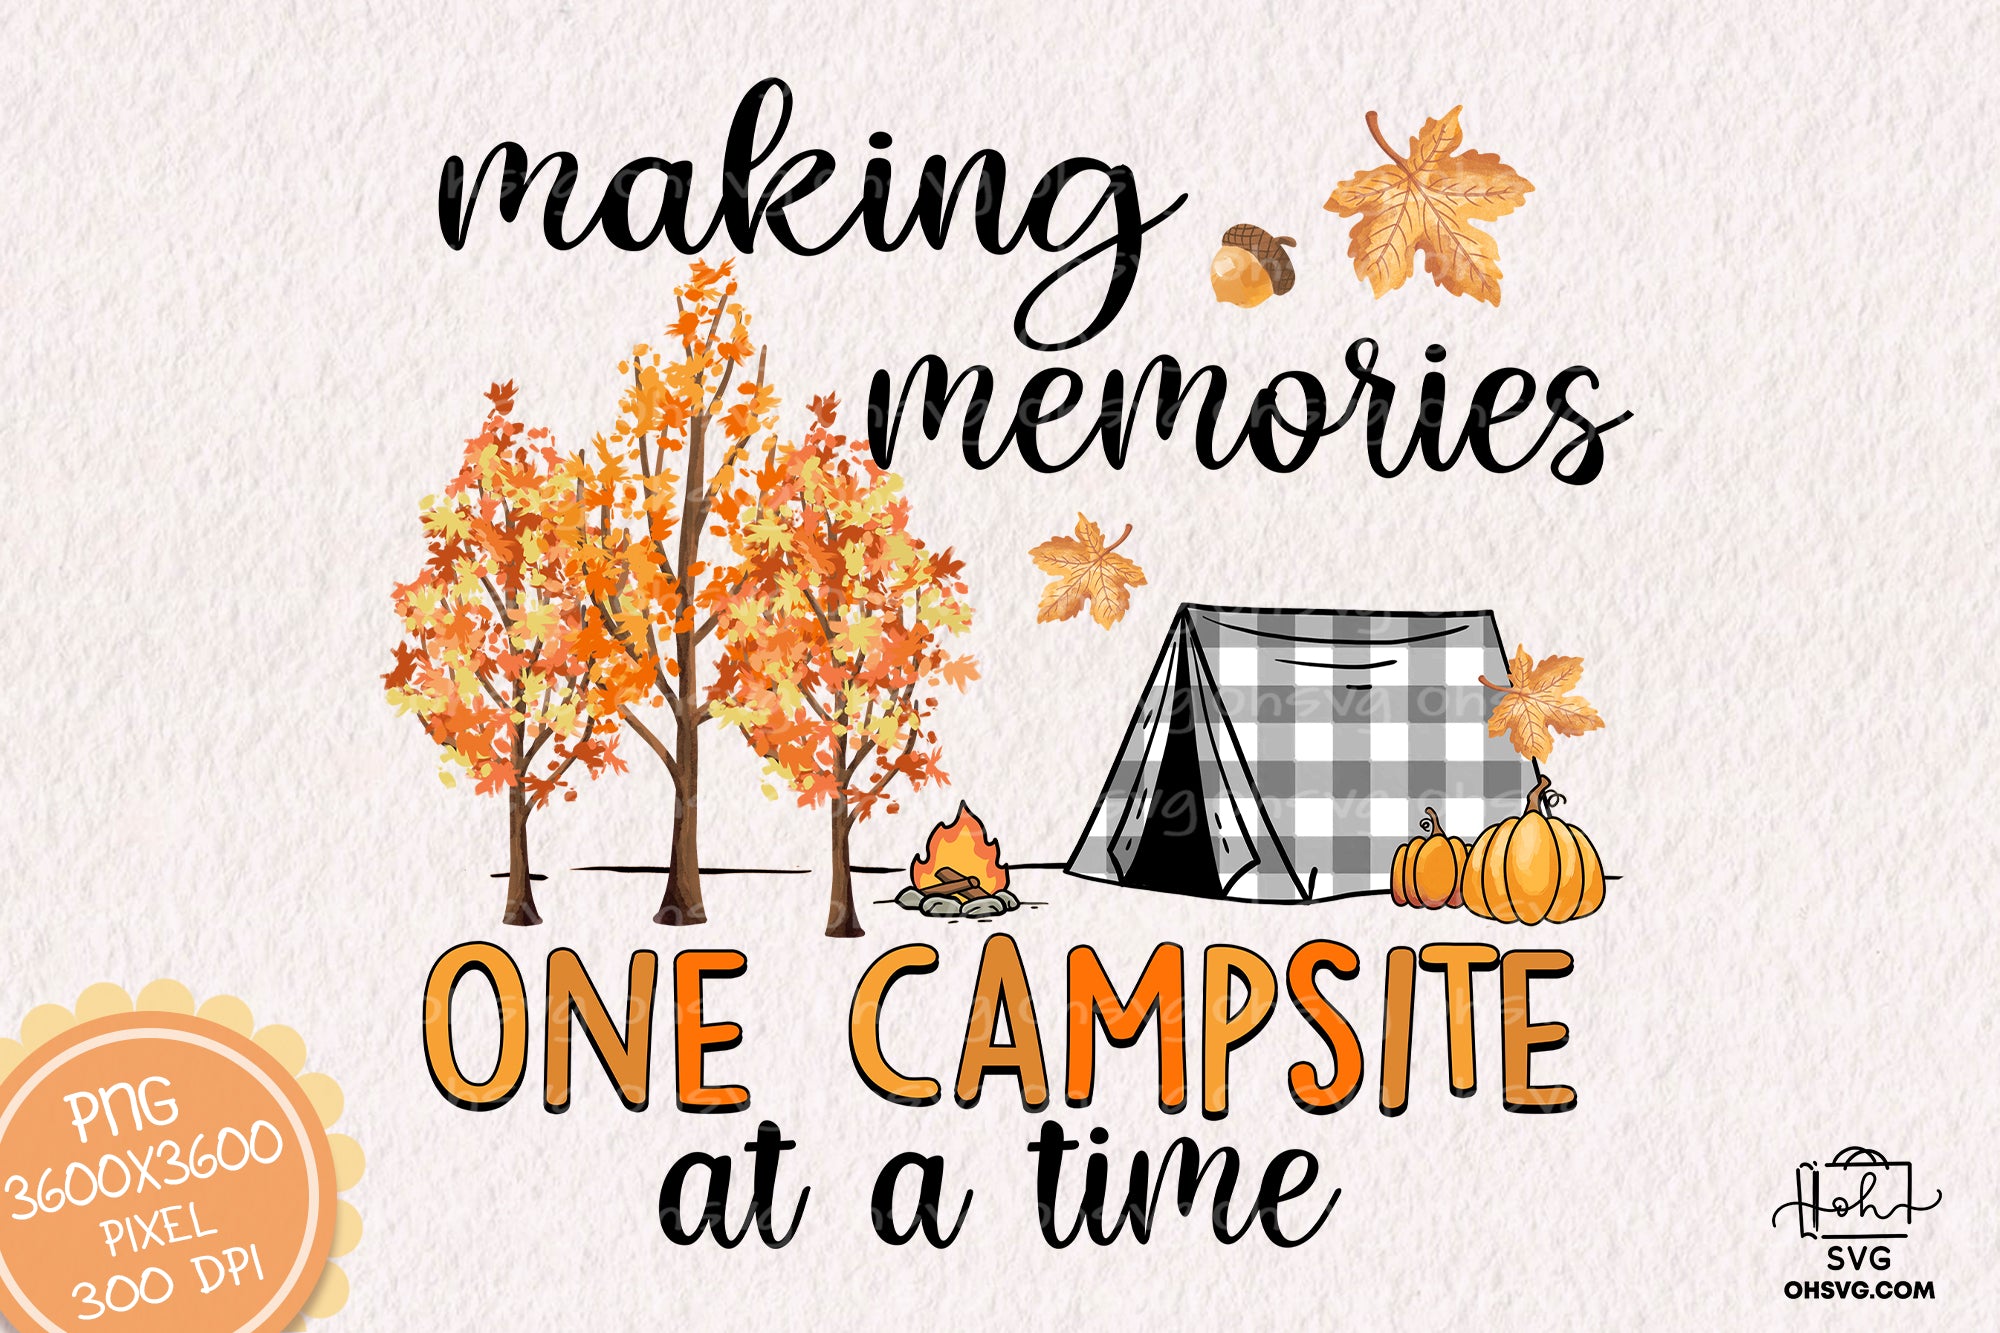 Making Memories One Campsite At A Time Camping Sublimation PNG, Camping Life PNG, Camping Outdoor PNG